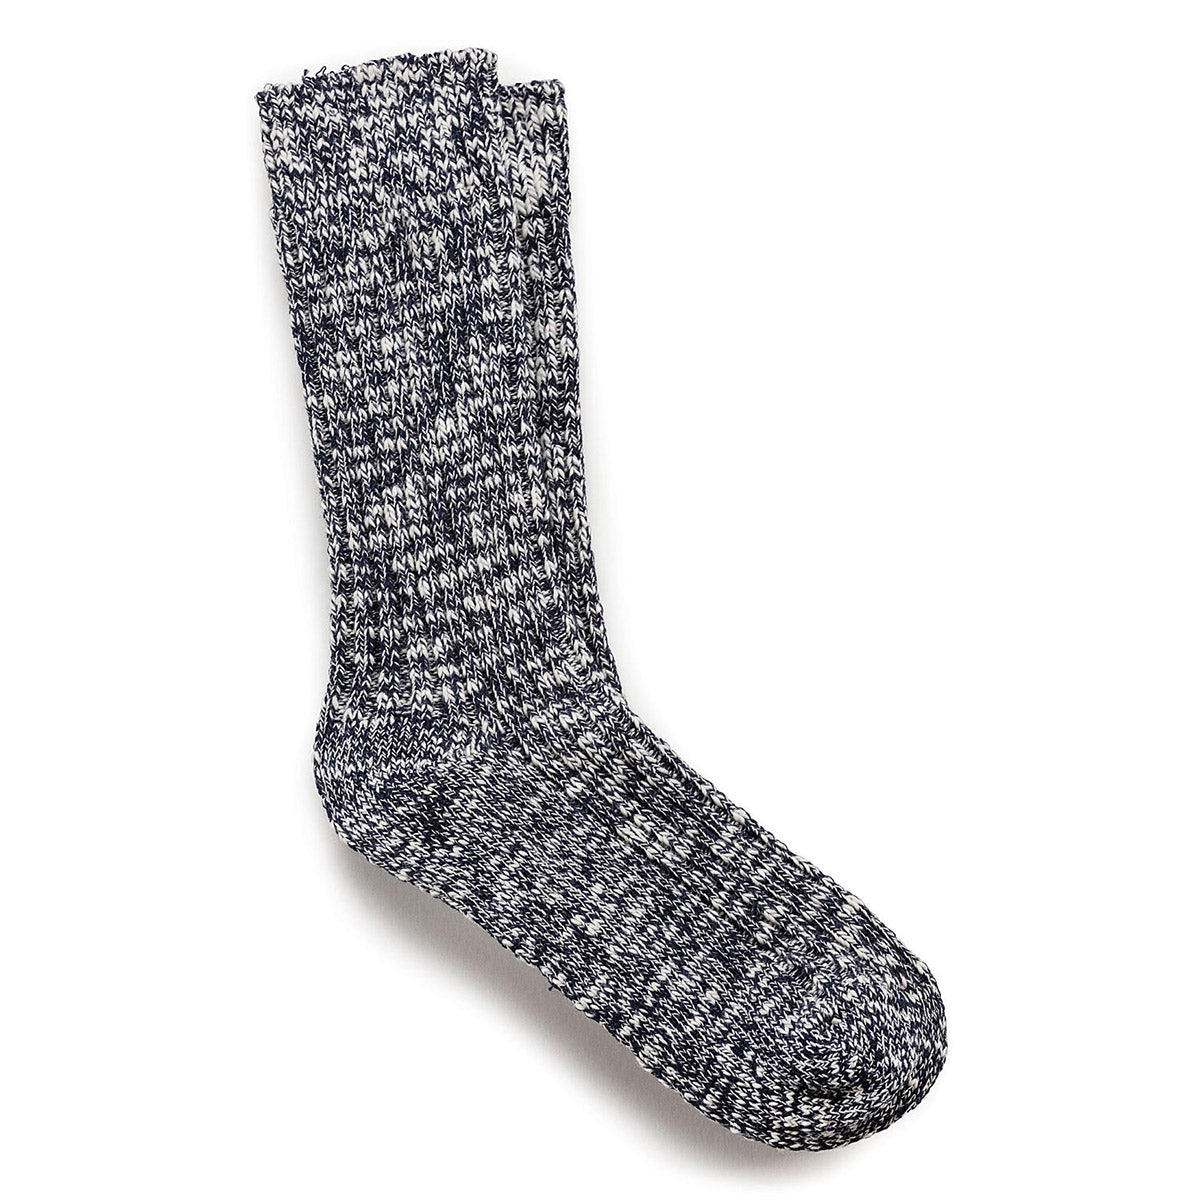 A single Birkenstock cotton slub sock blue/white, part of our product promotions, displayed against a white background.